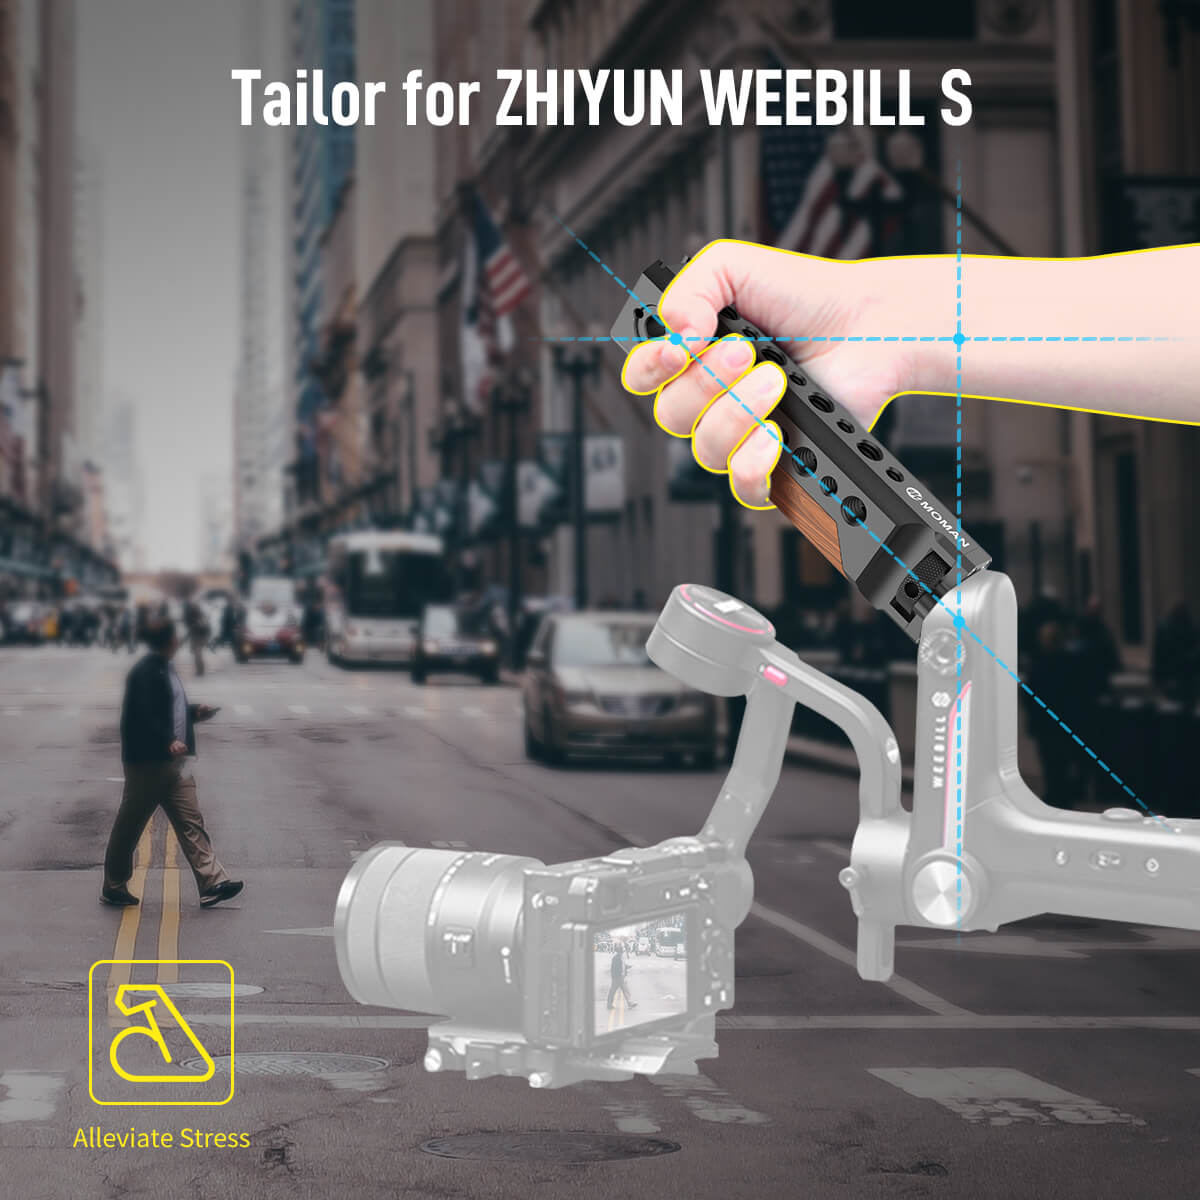 Moman MG6 tailors for ZHIYUN WEEBILL S to shoot at a low angle